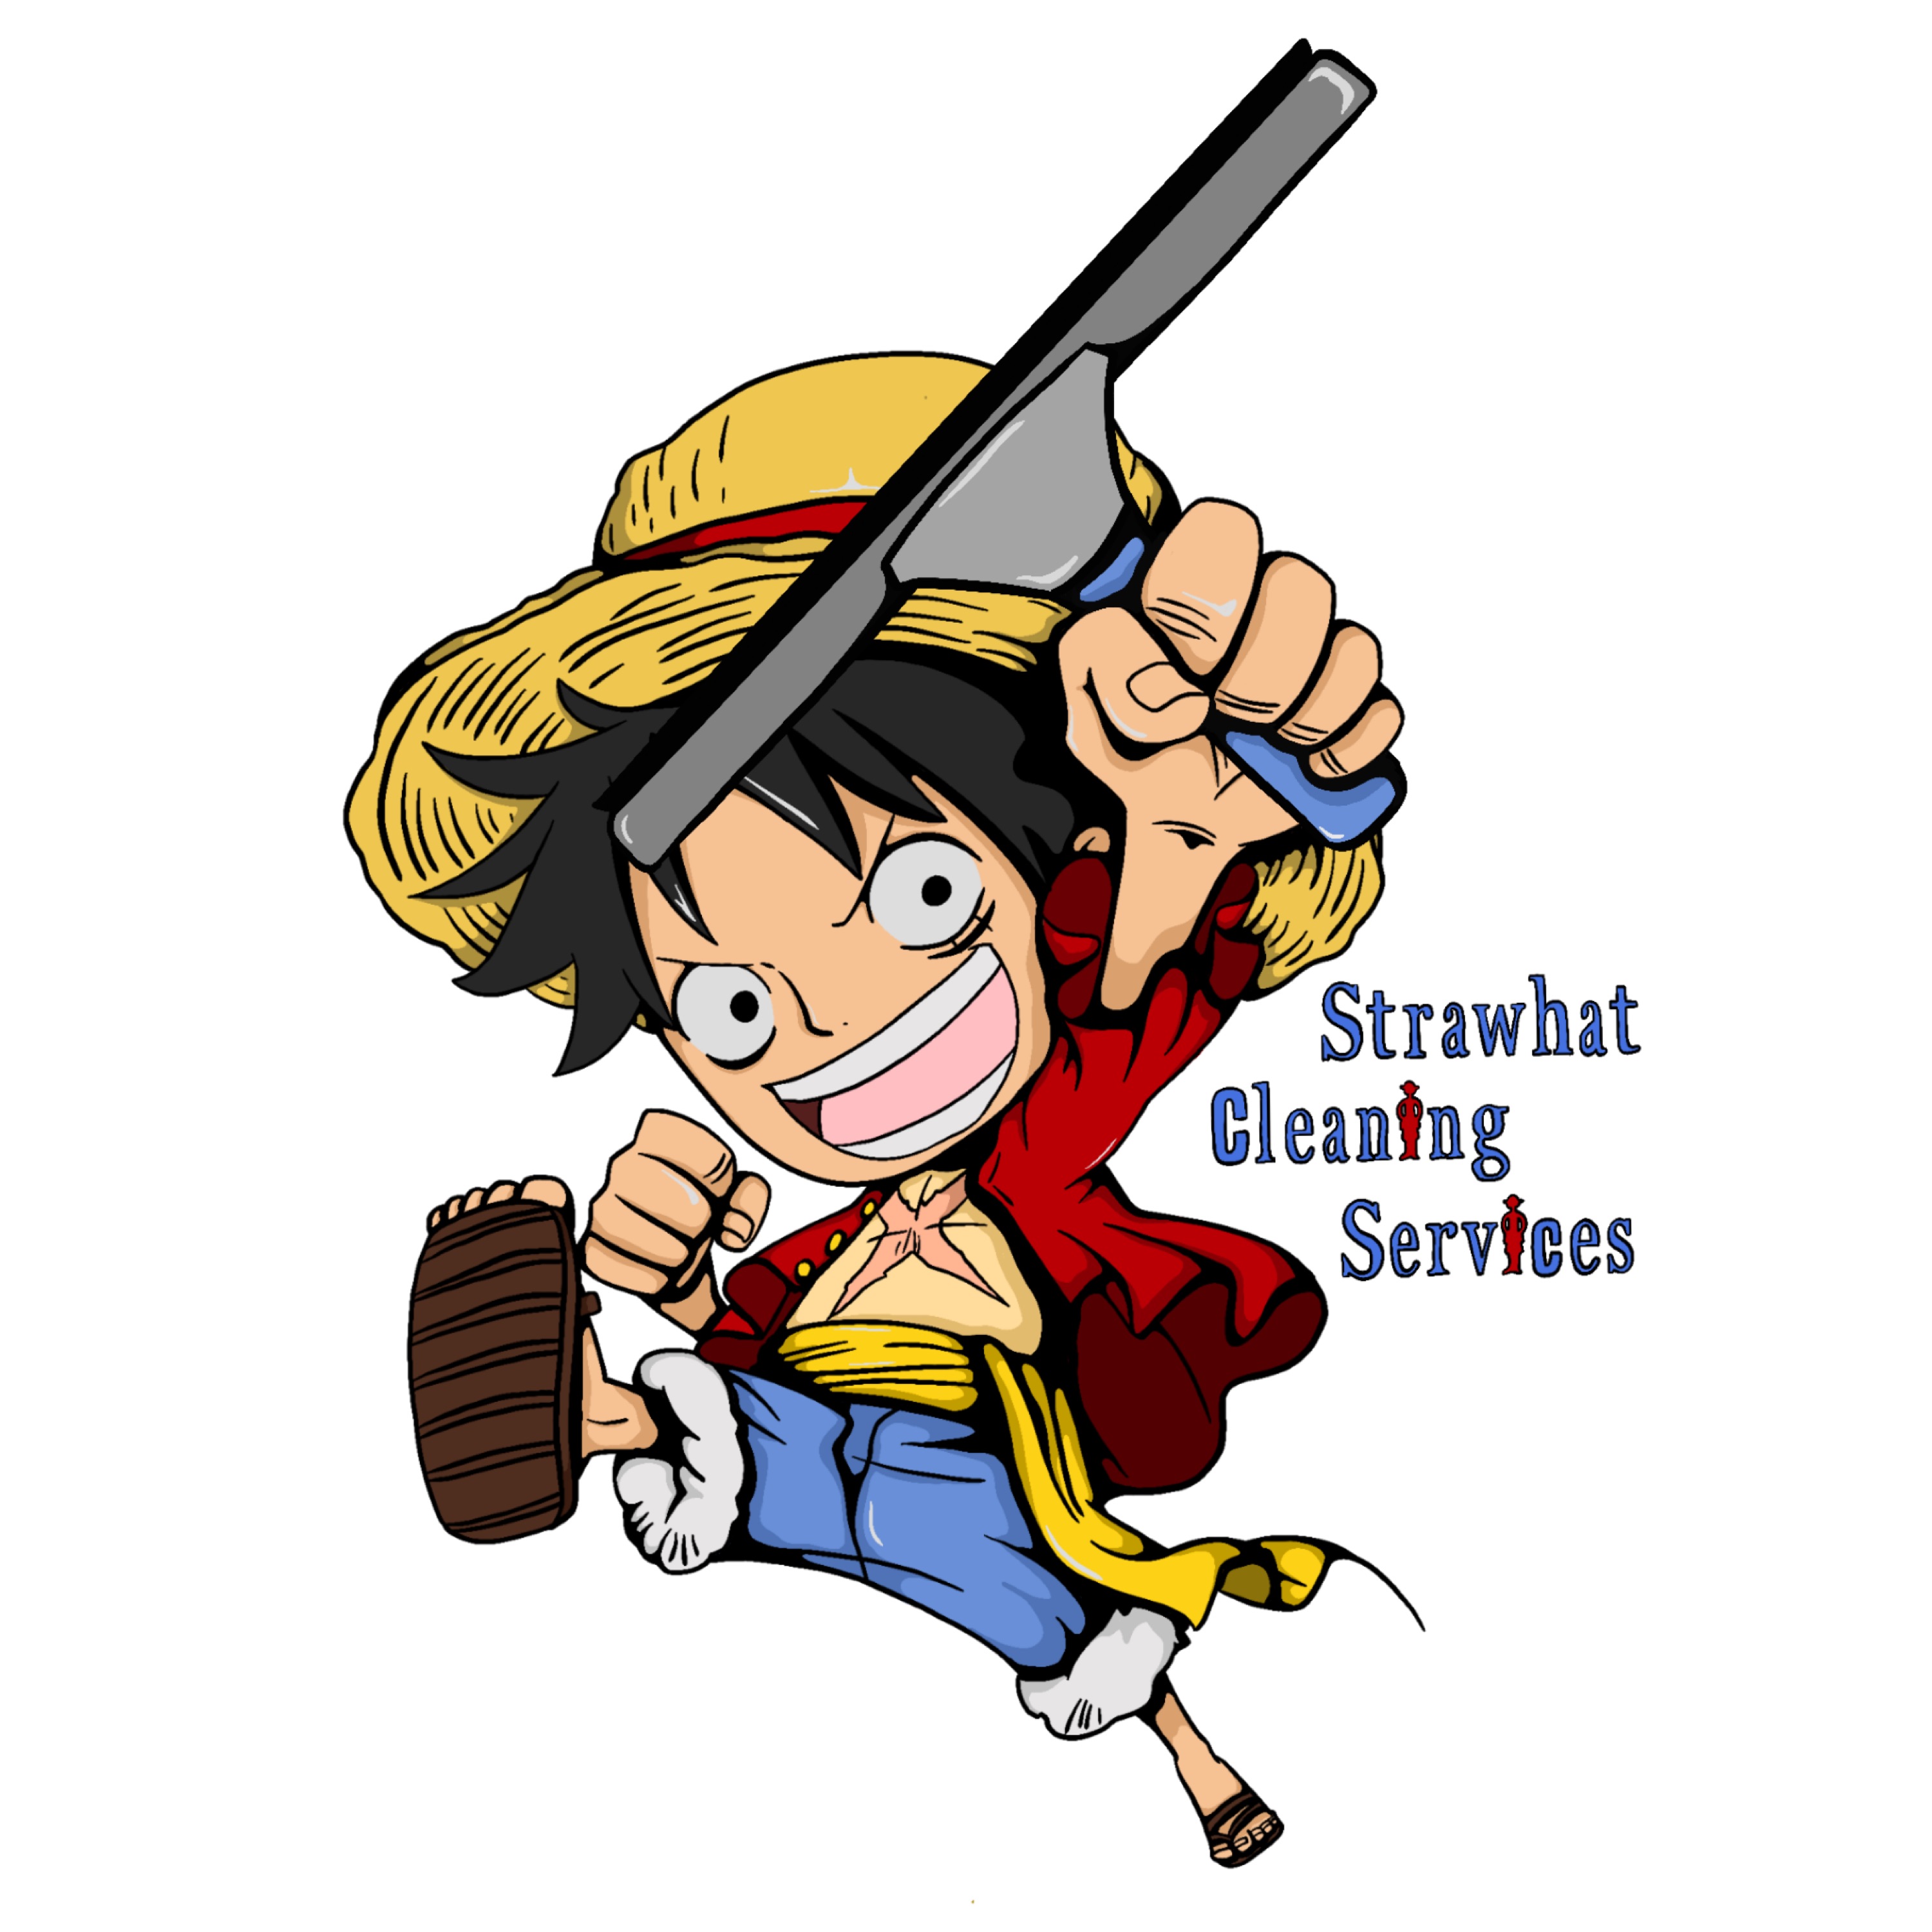 Strawhat Cleaning Services Logo